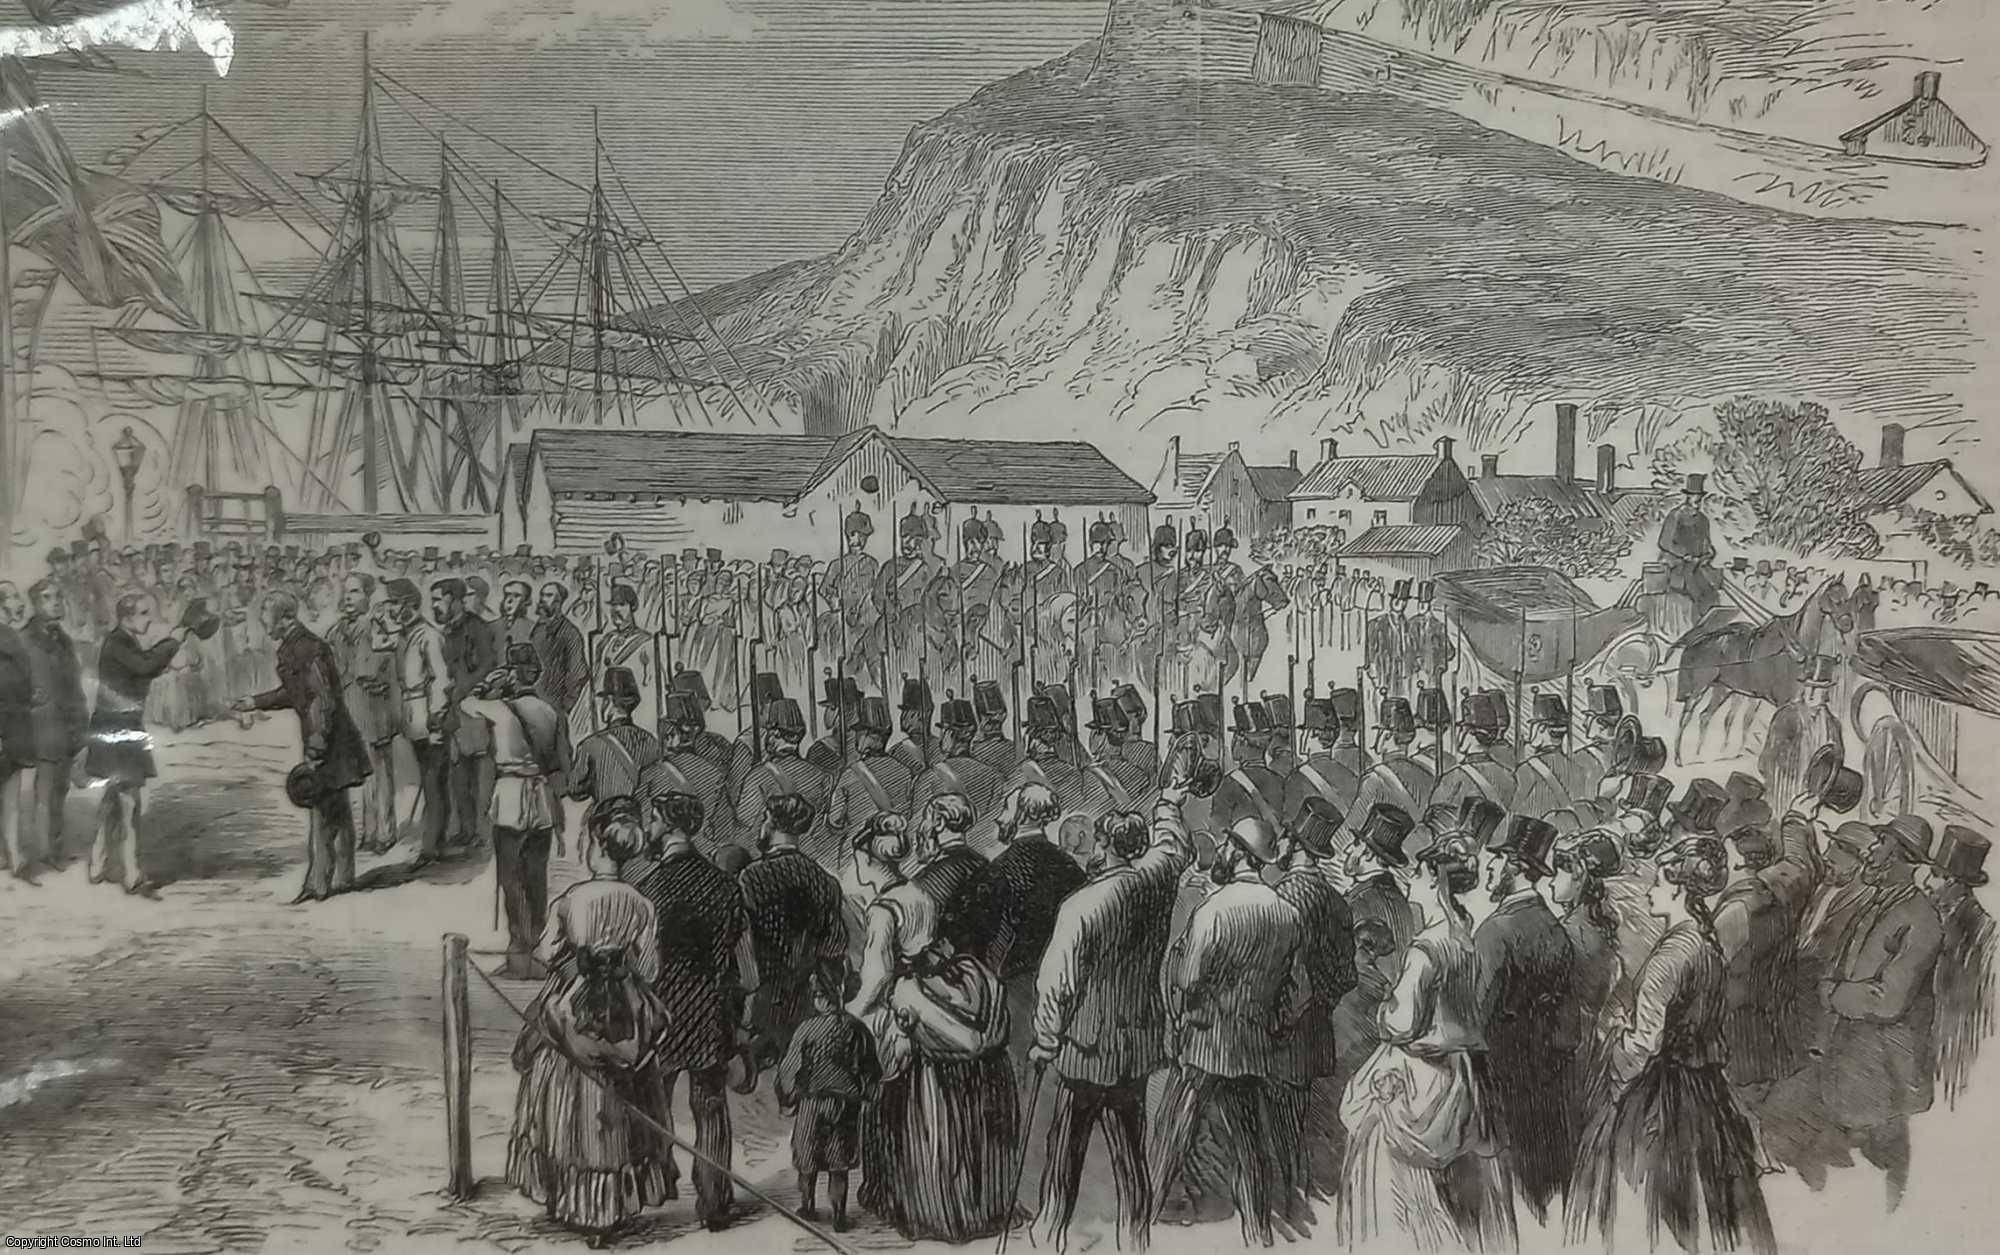 CANADA - Landing of Prince Arthur at Quebec. An original print from the Illustrated London News, 1869.